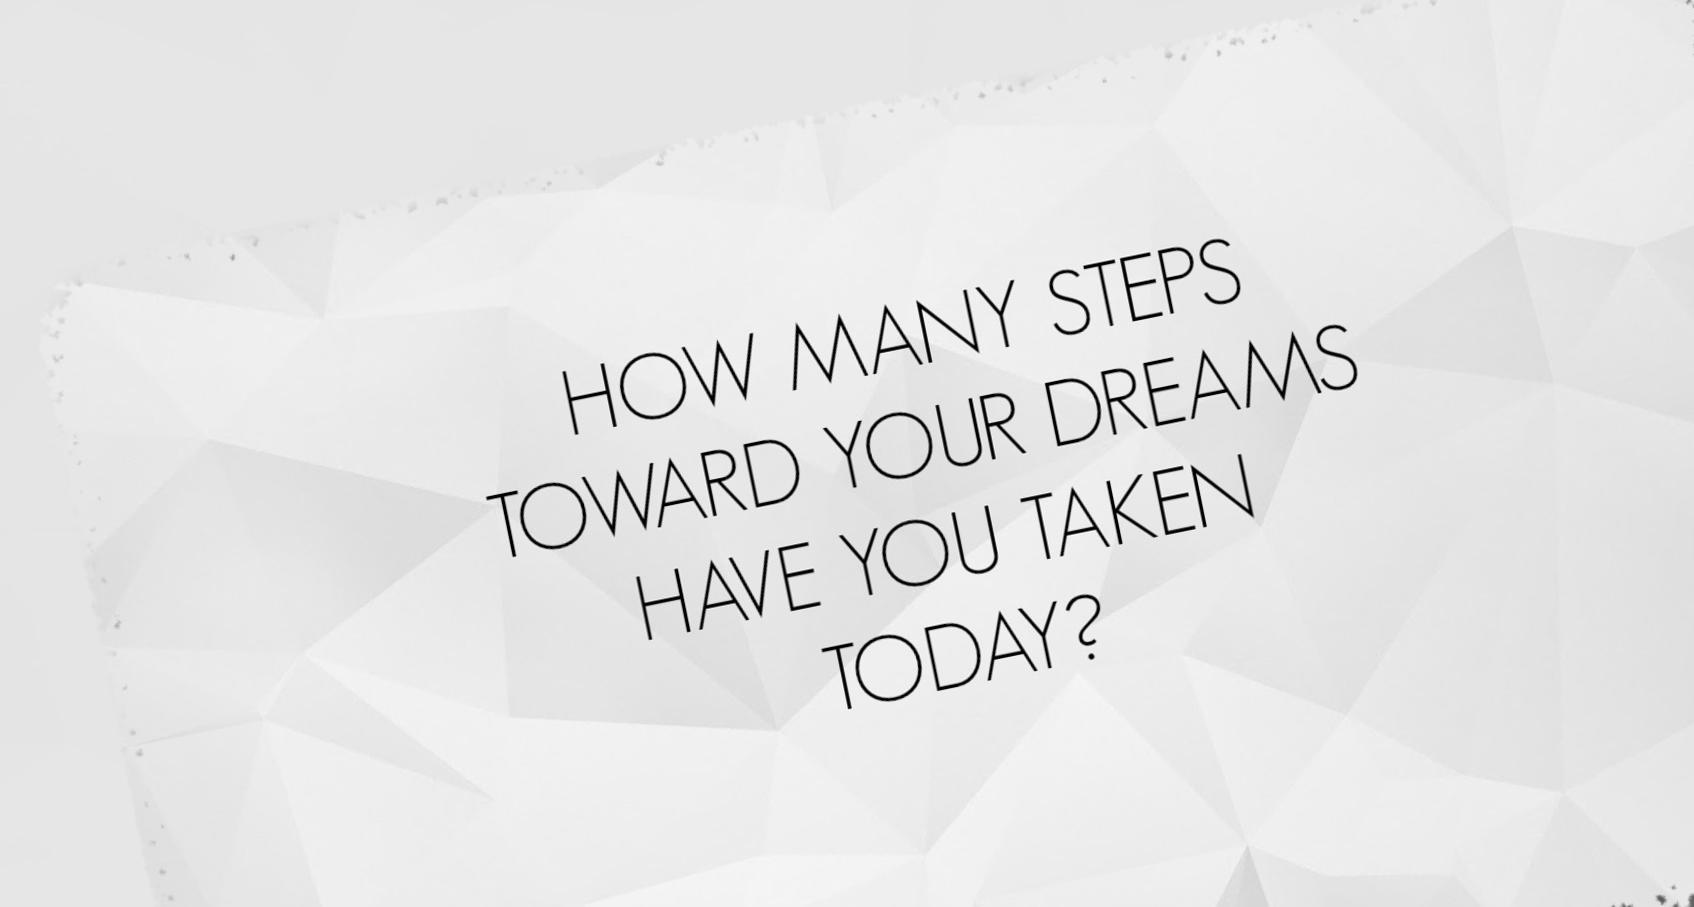 how many steps toward your dreams have you taken today